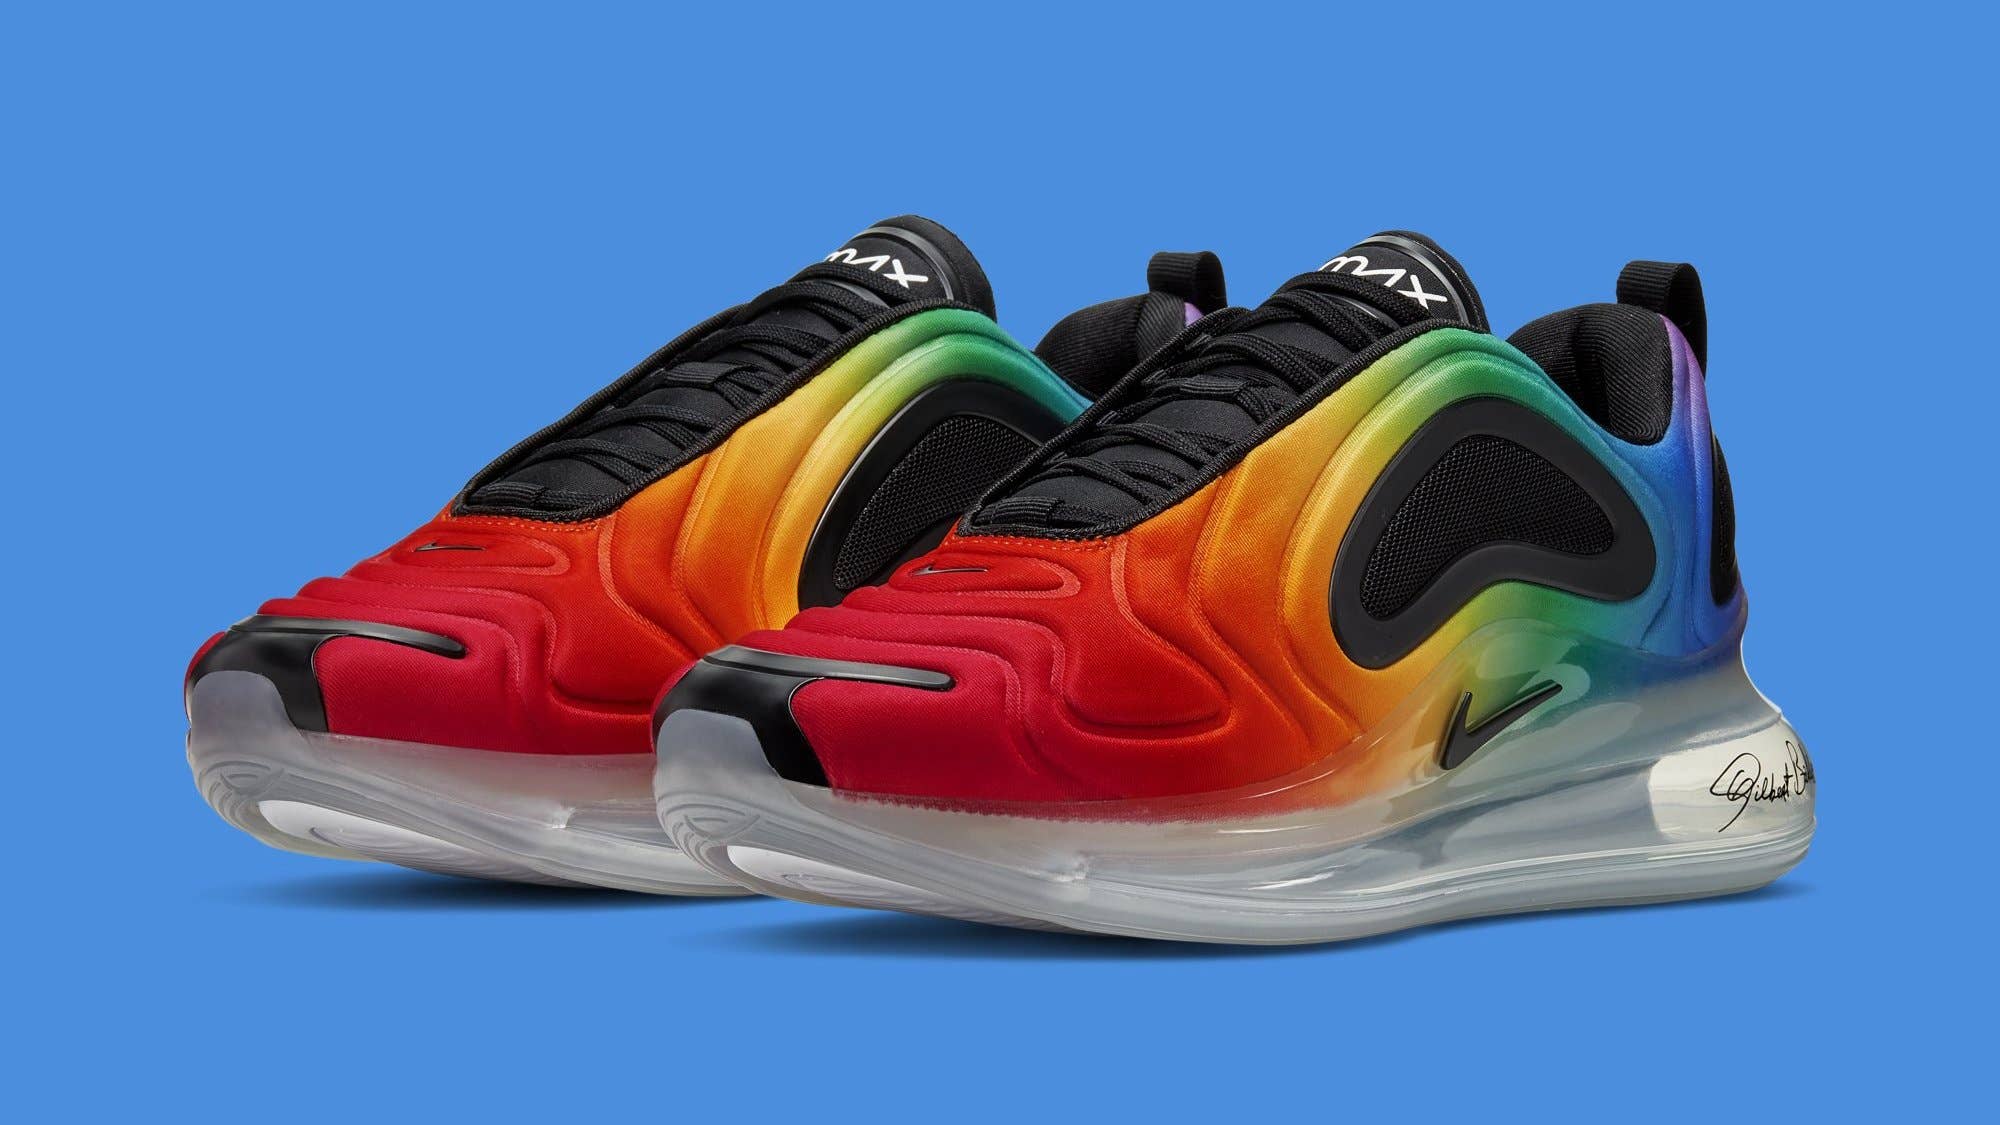 chef Nacht hoed This Rainbow-Colored Air Max 720 Is Inspired By the Pride Flag | Complex